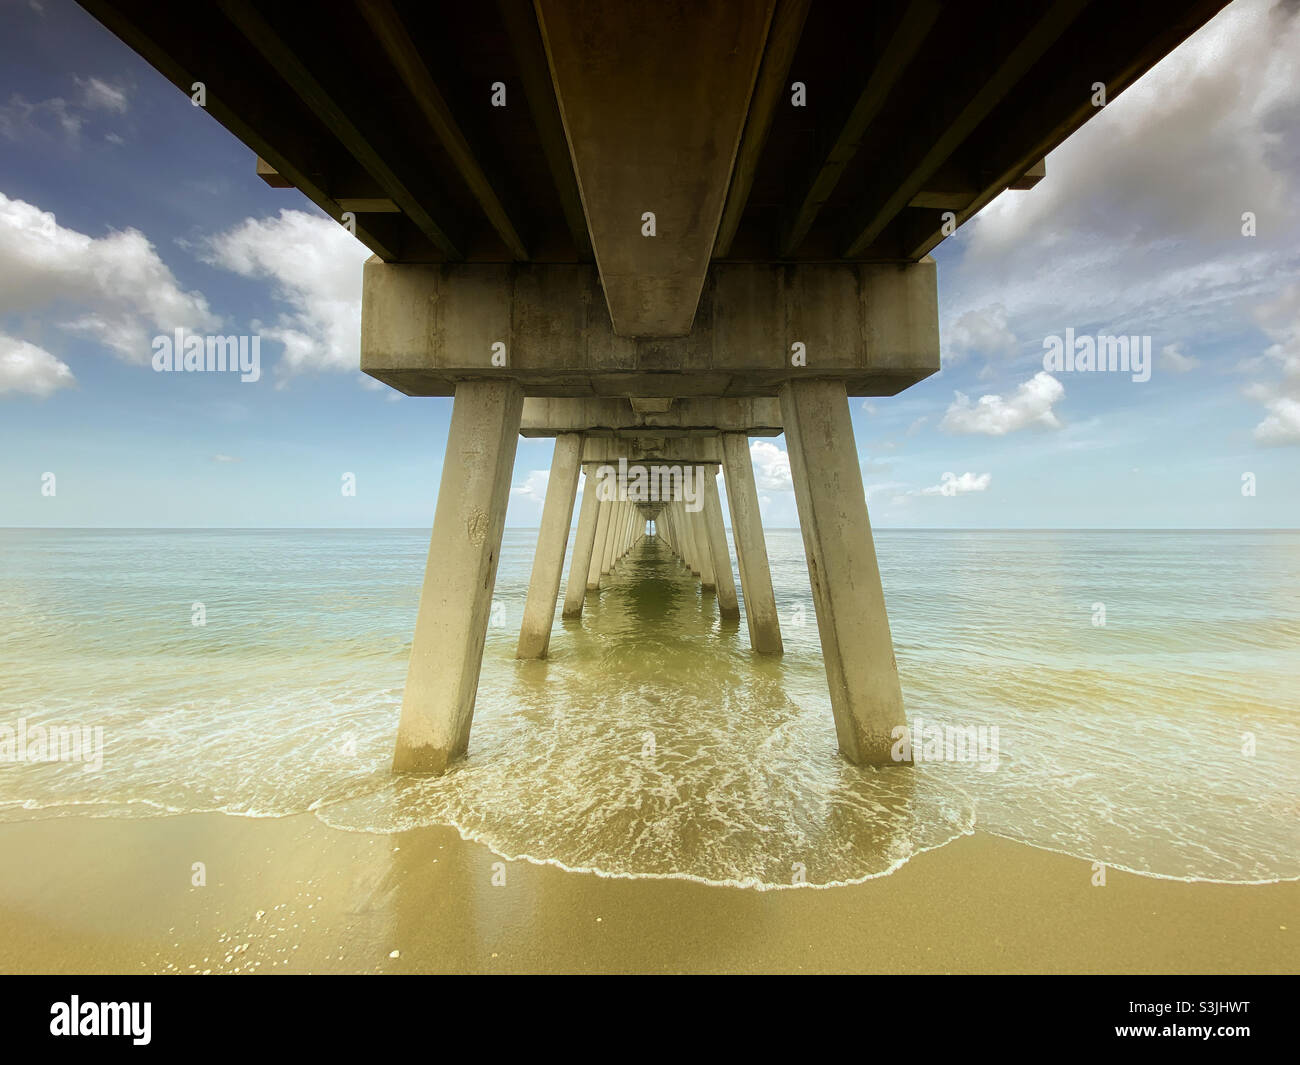 Underneath pier in Gulf of Mexico Stock Photo